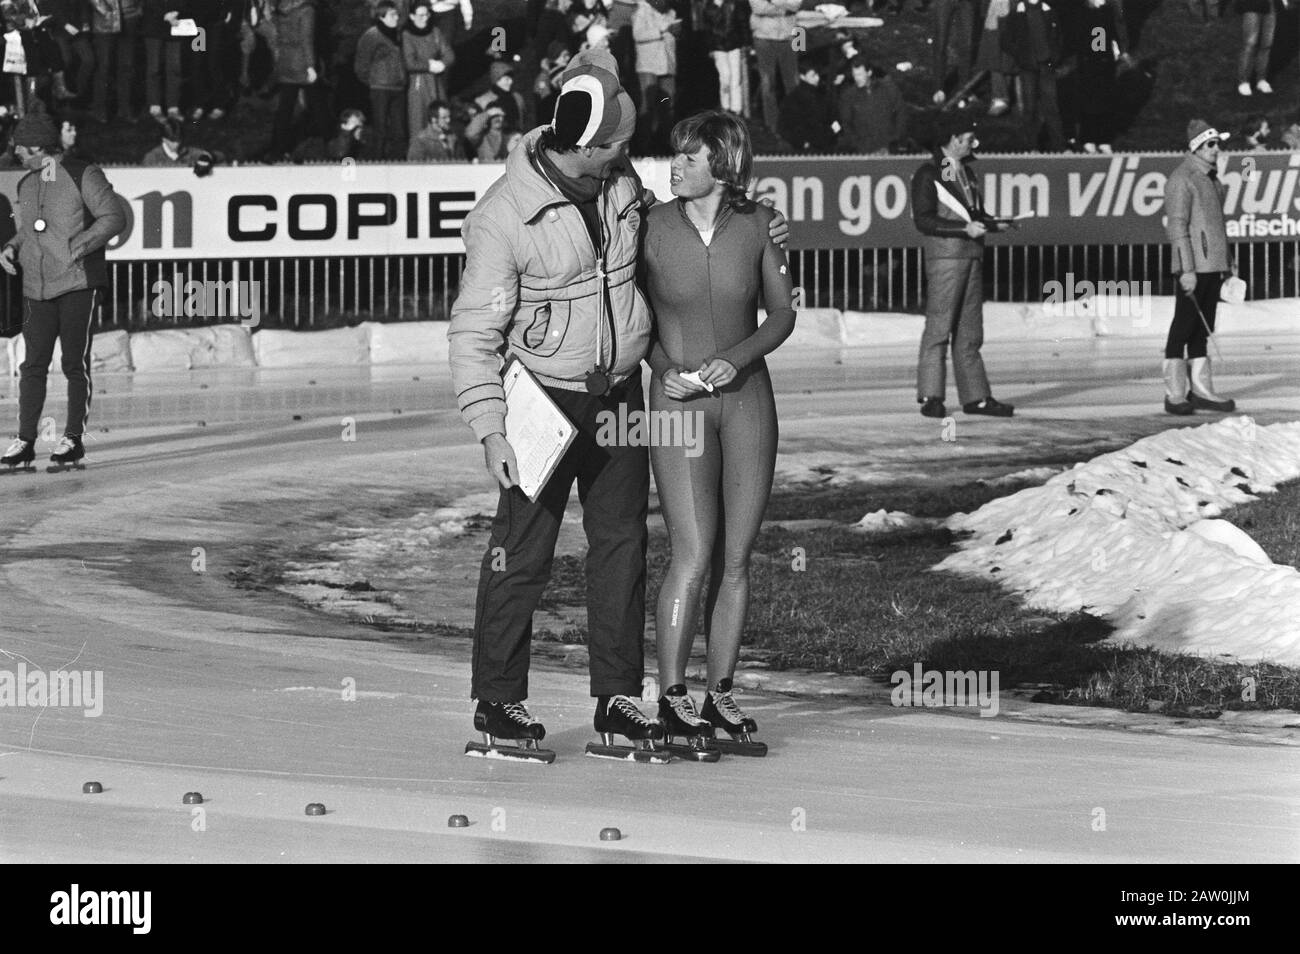 Dutch skating championships ladies round in Assen. Ria Visser with her coach Jan bosses. Date: January 11, 1981 Location: Assen Keywords: skating, sports Person Name: Bosses Jan fisherman Ria Stock Photo